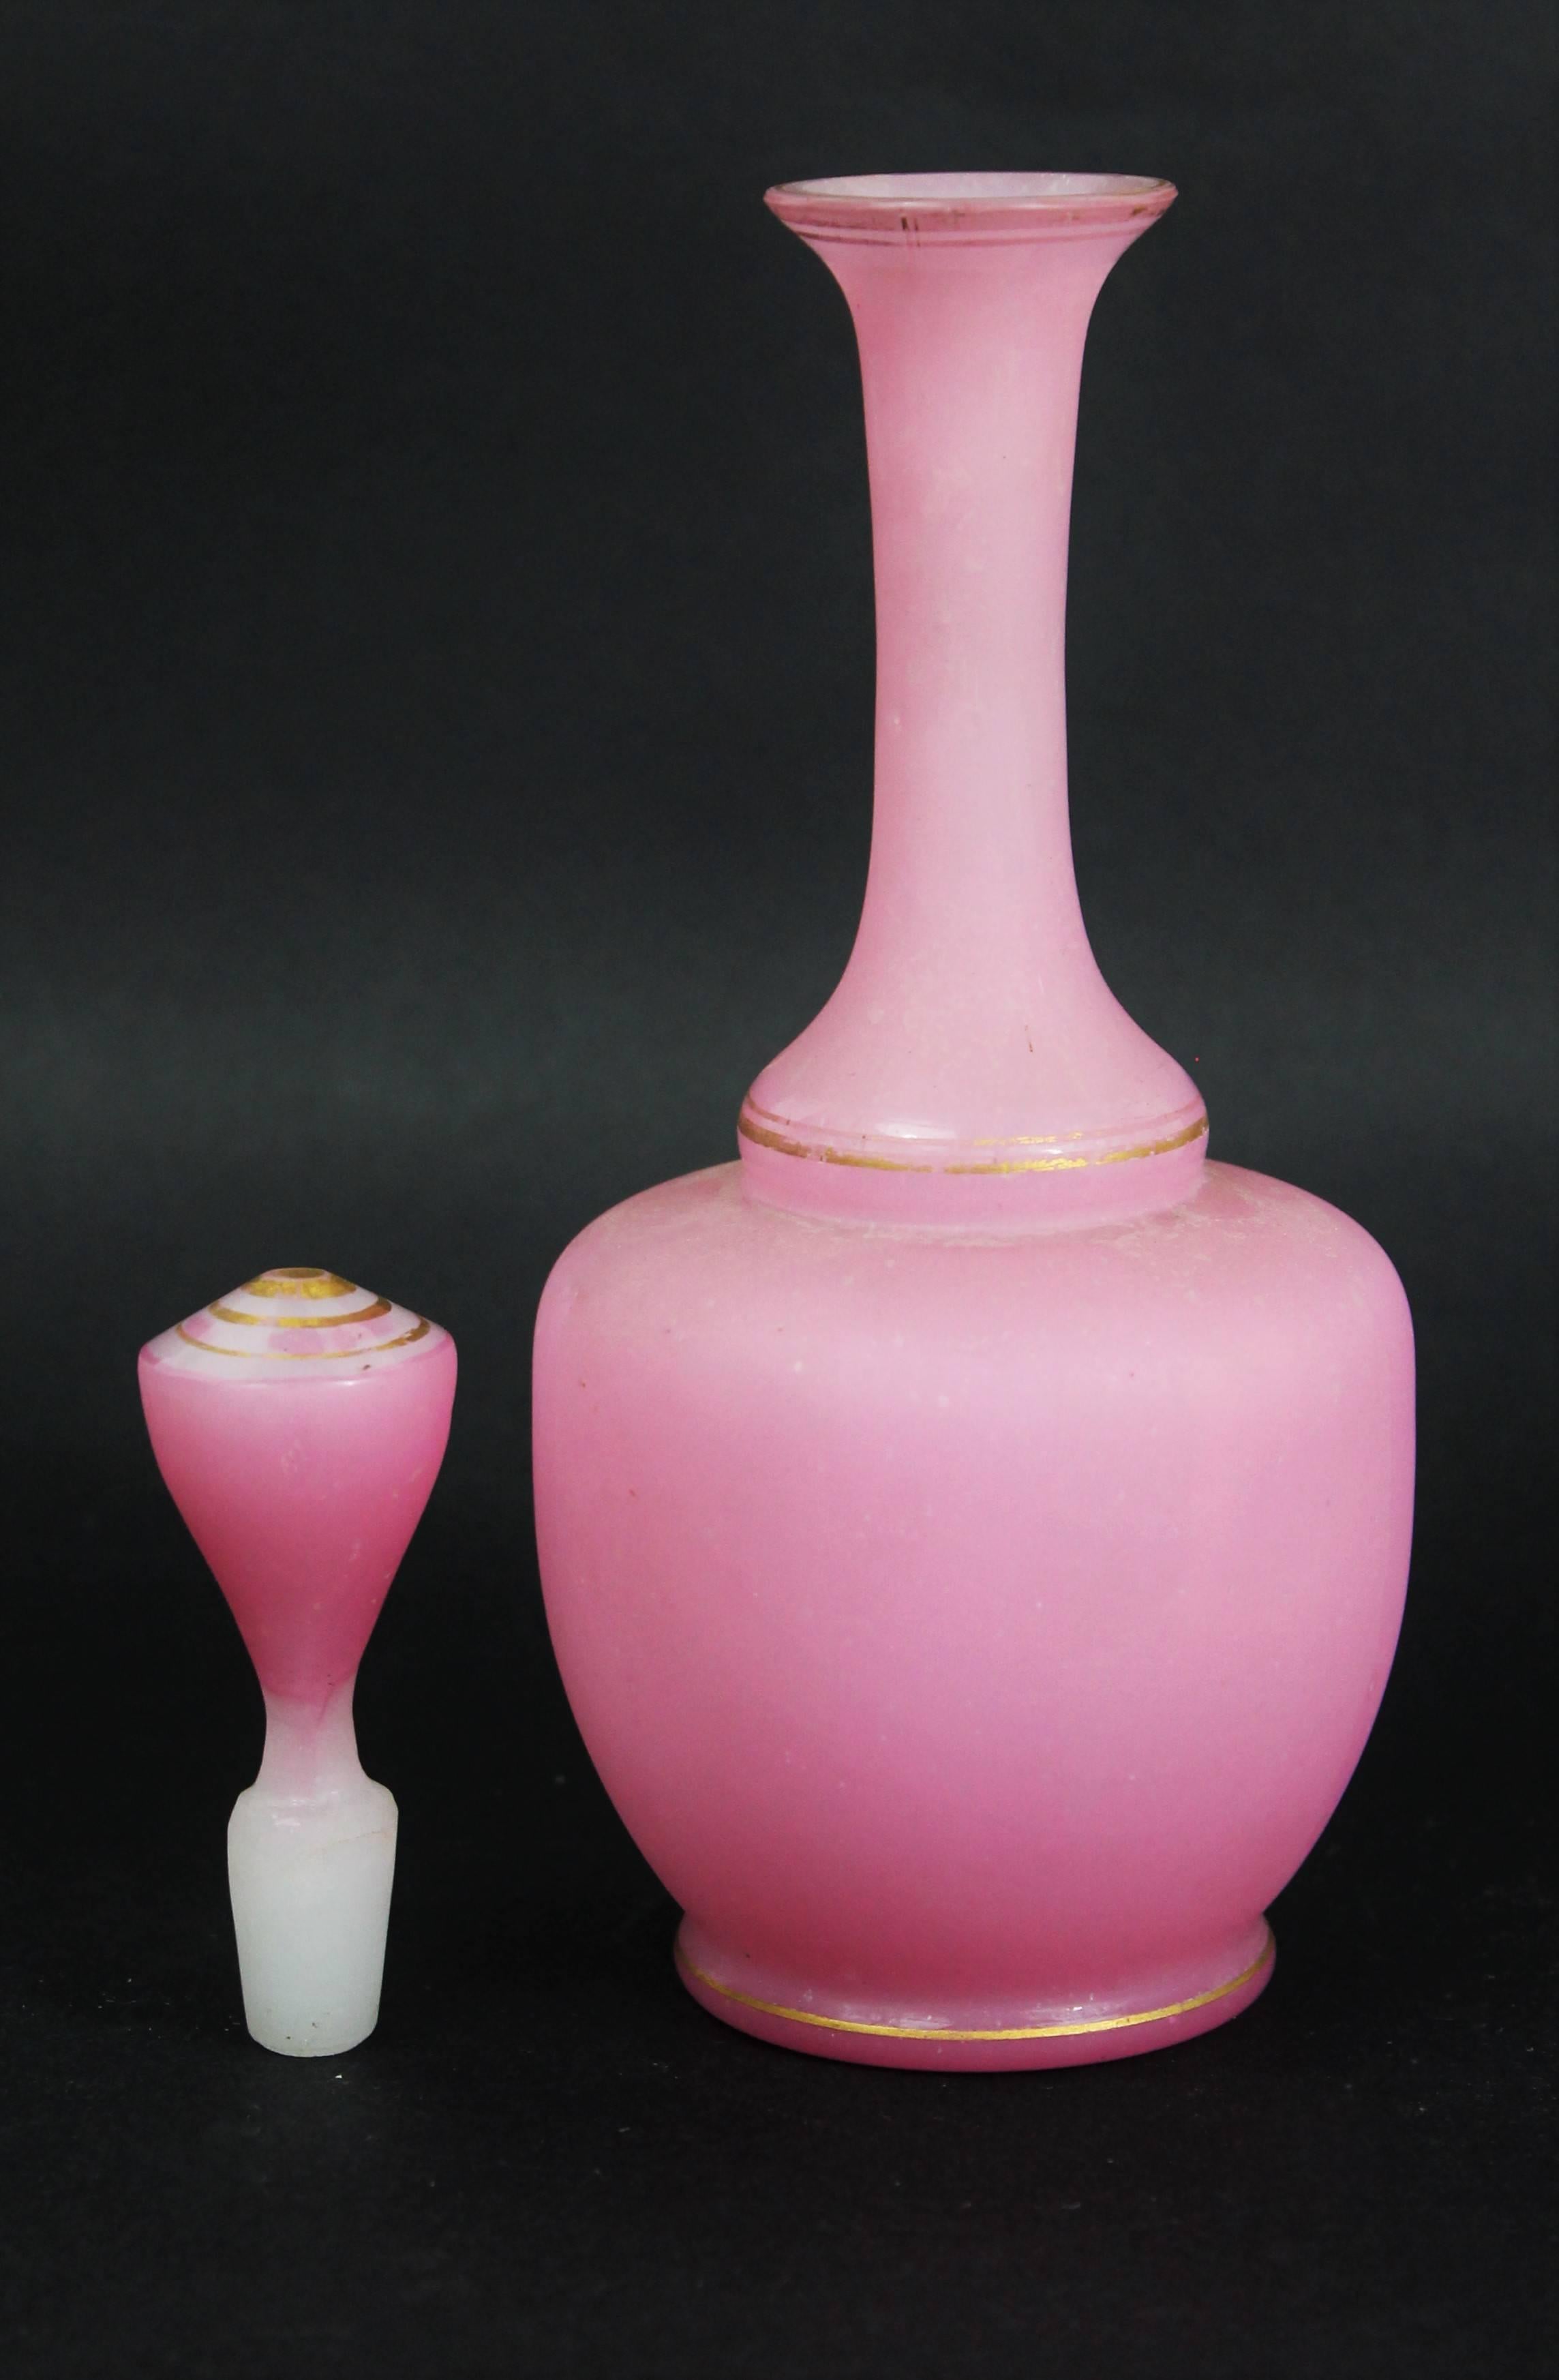 Charming liquor carafe in pink opaline and gilding,
France
Napoleon III period.